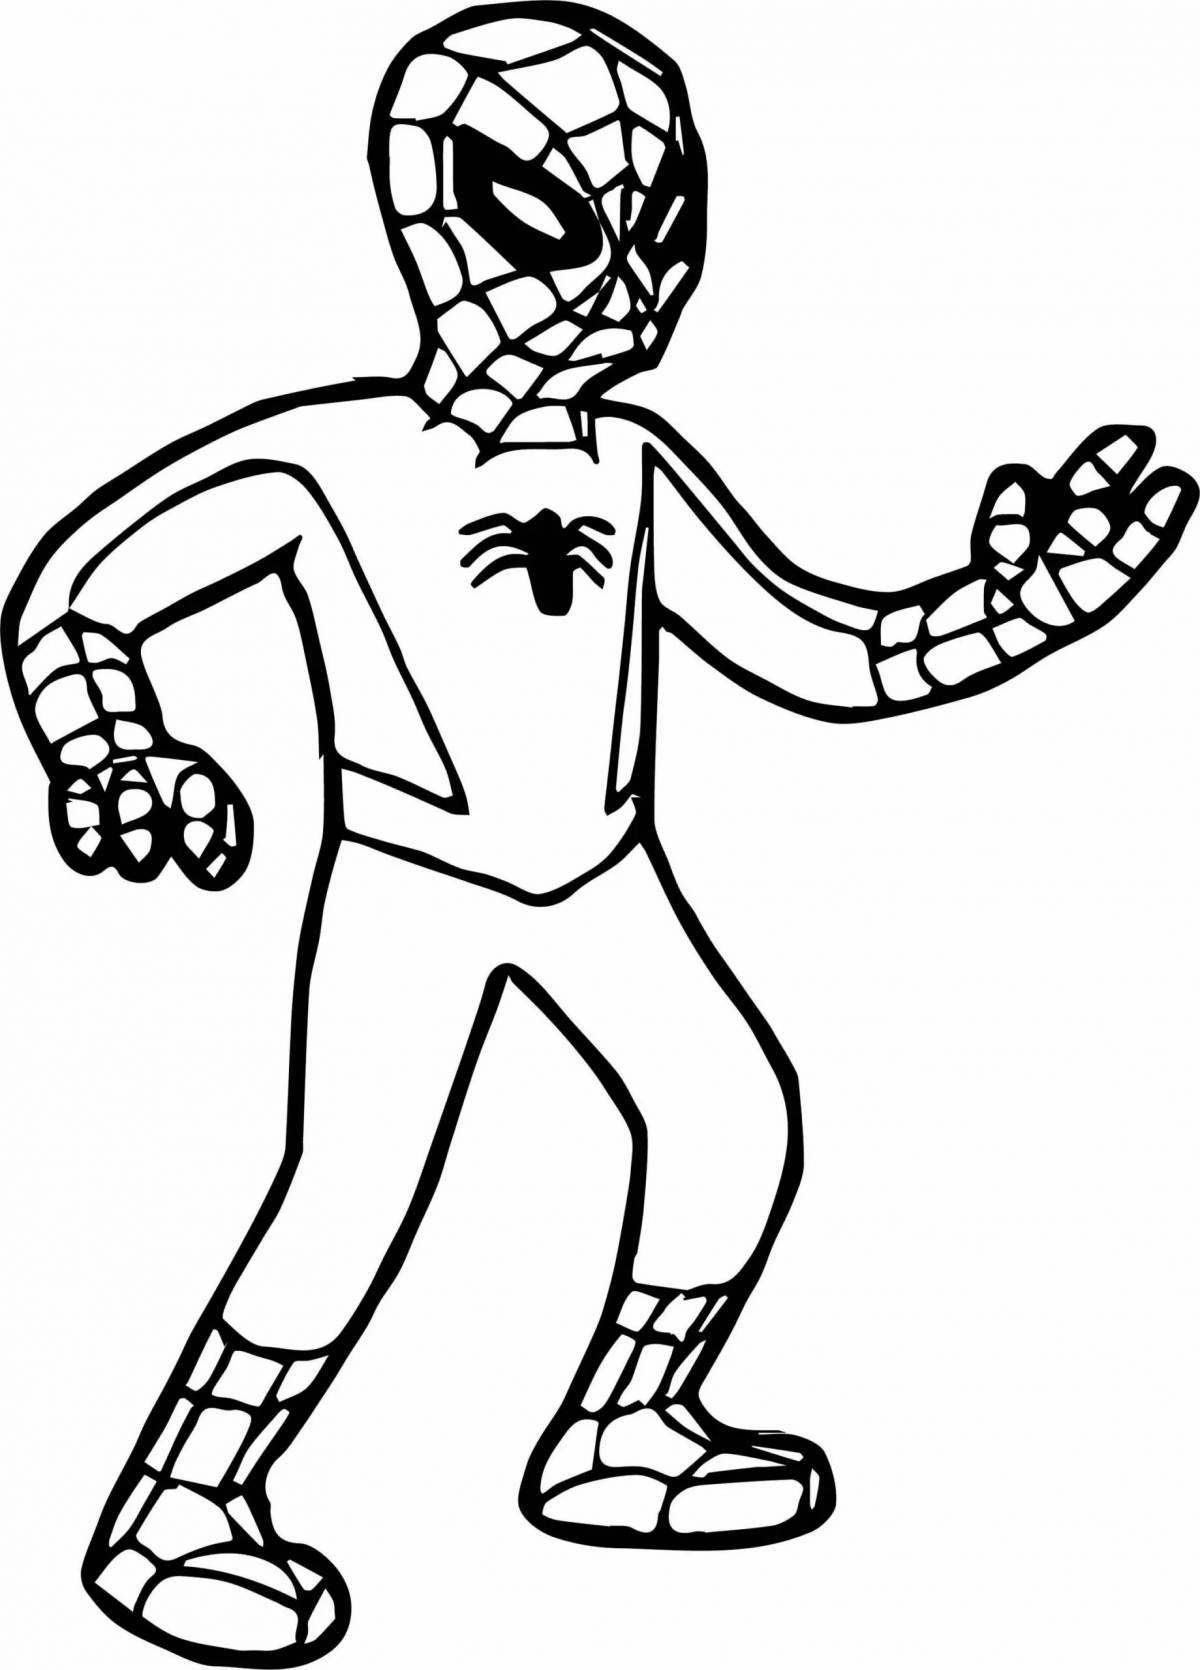 Great coloring book of spiderman for kids